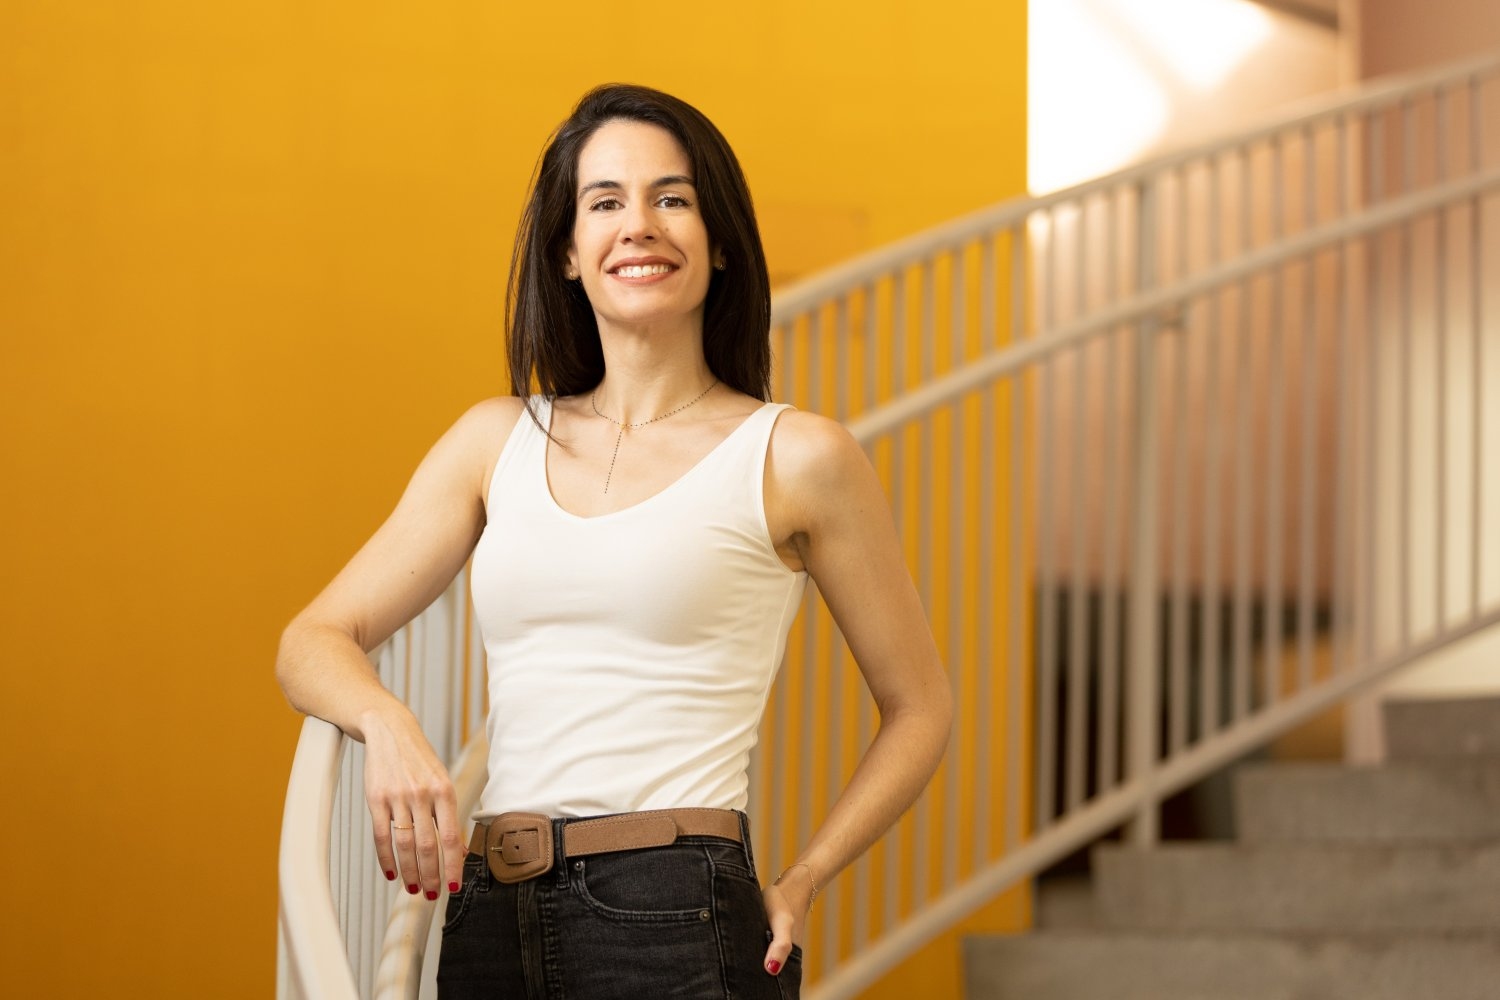 Inspired by jellyfish and octopus, Juncal Arbelaiz Mugica is an applied math major who is working on the fundamentals of optimal distributed control and estimation during her final weeks before graduating from MIT this month.